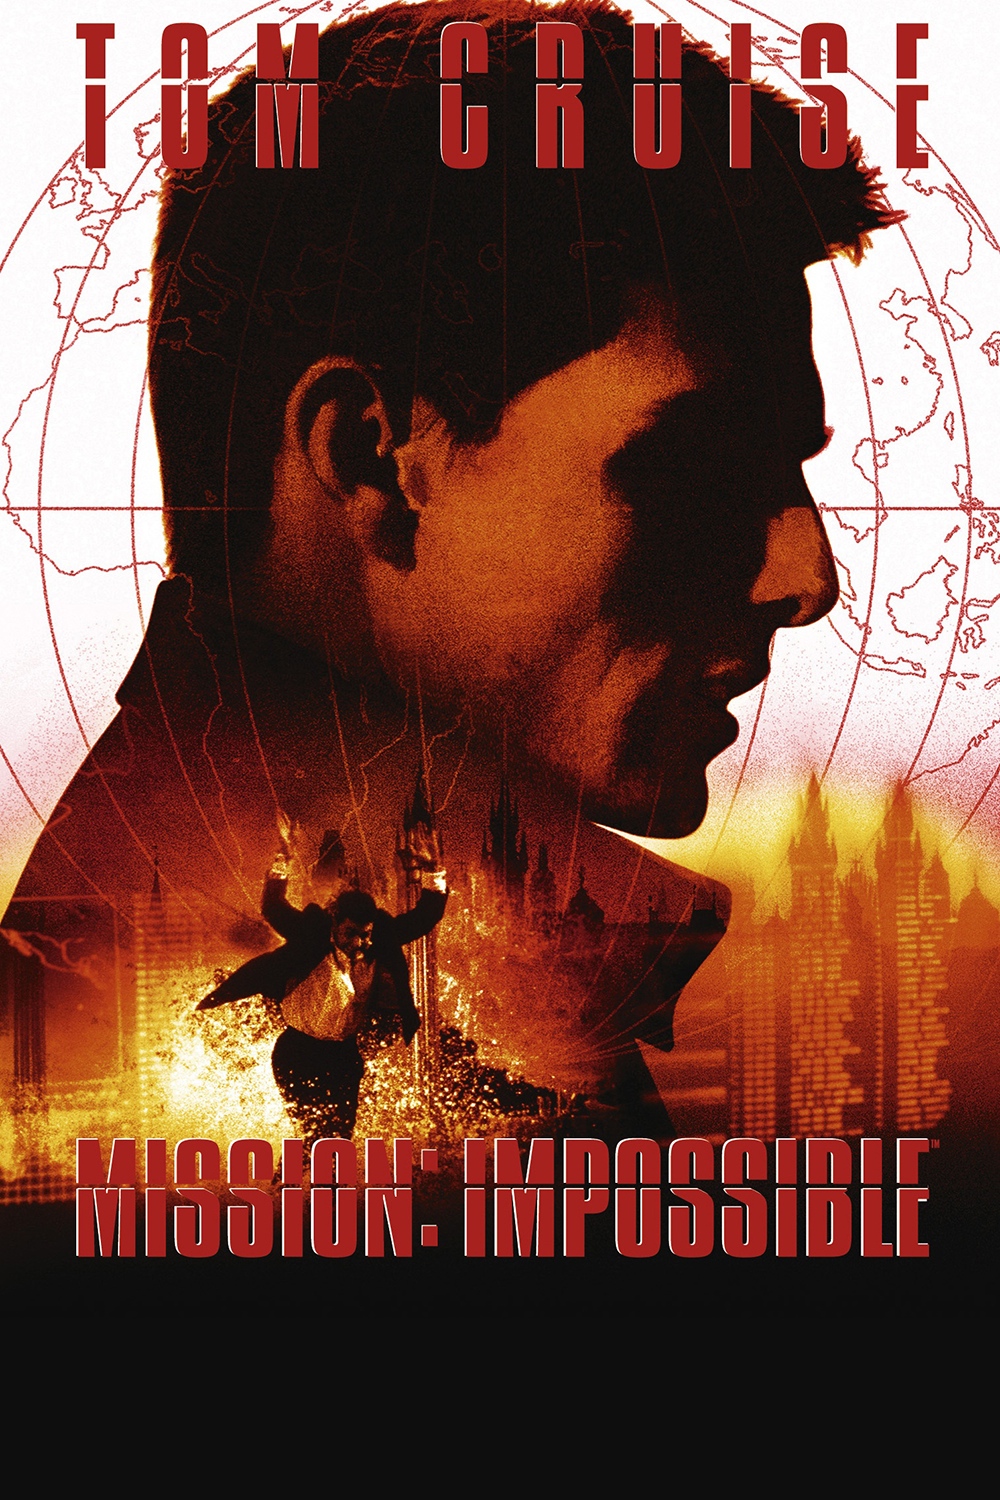 mission impossible 1-4 tetralogy 1996-2011